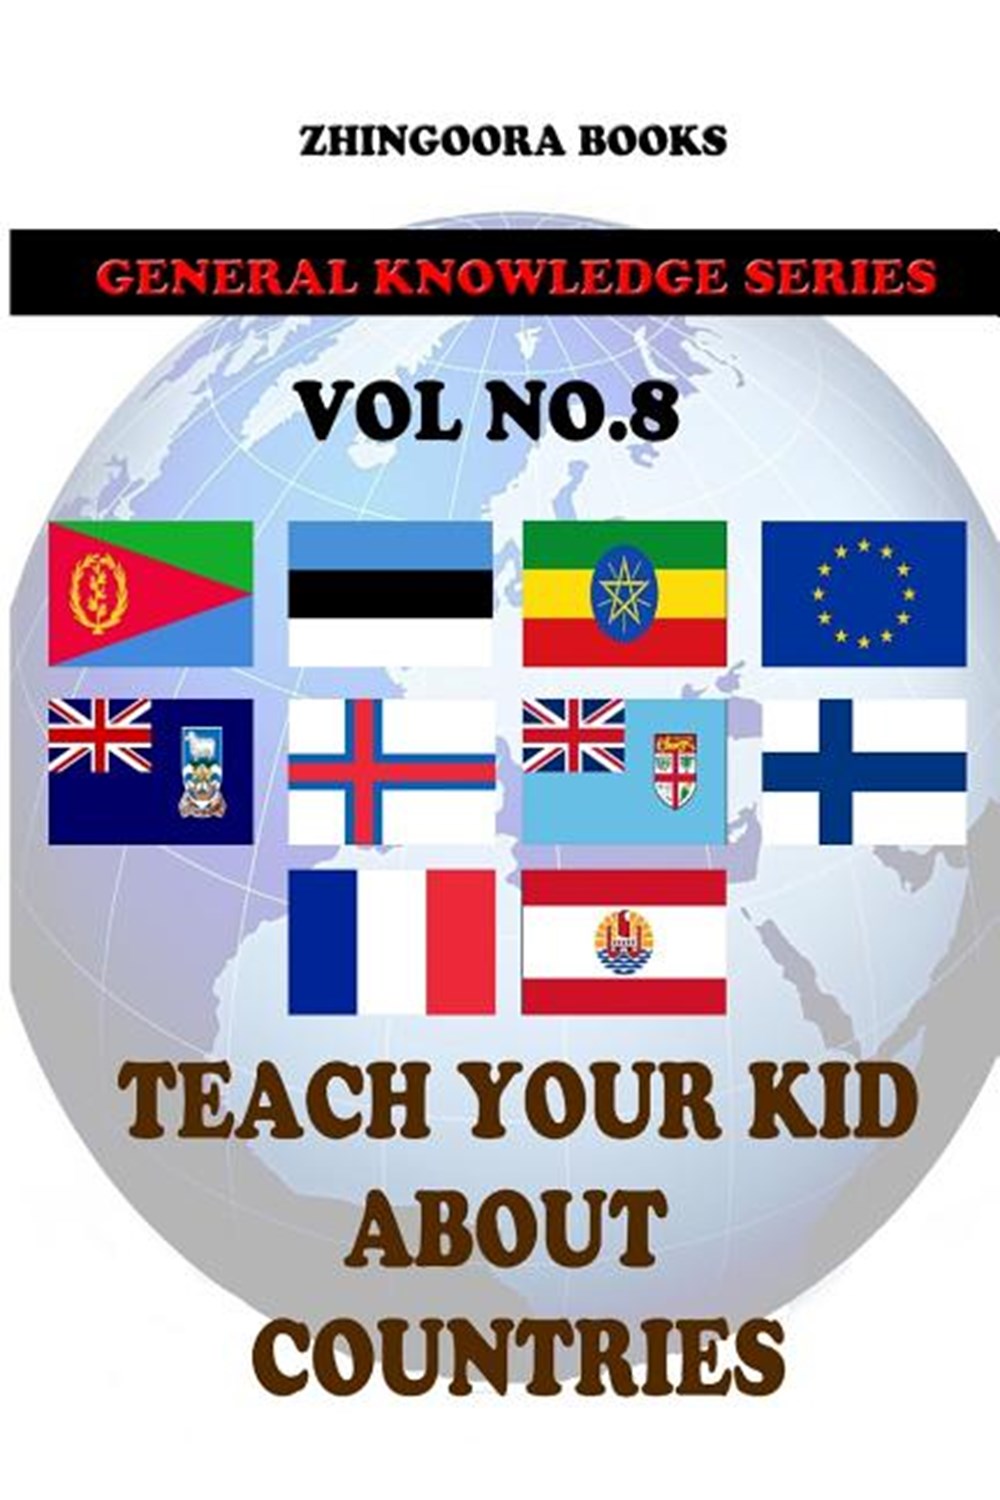 Teach Your Kids About Countries [Vol 5]